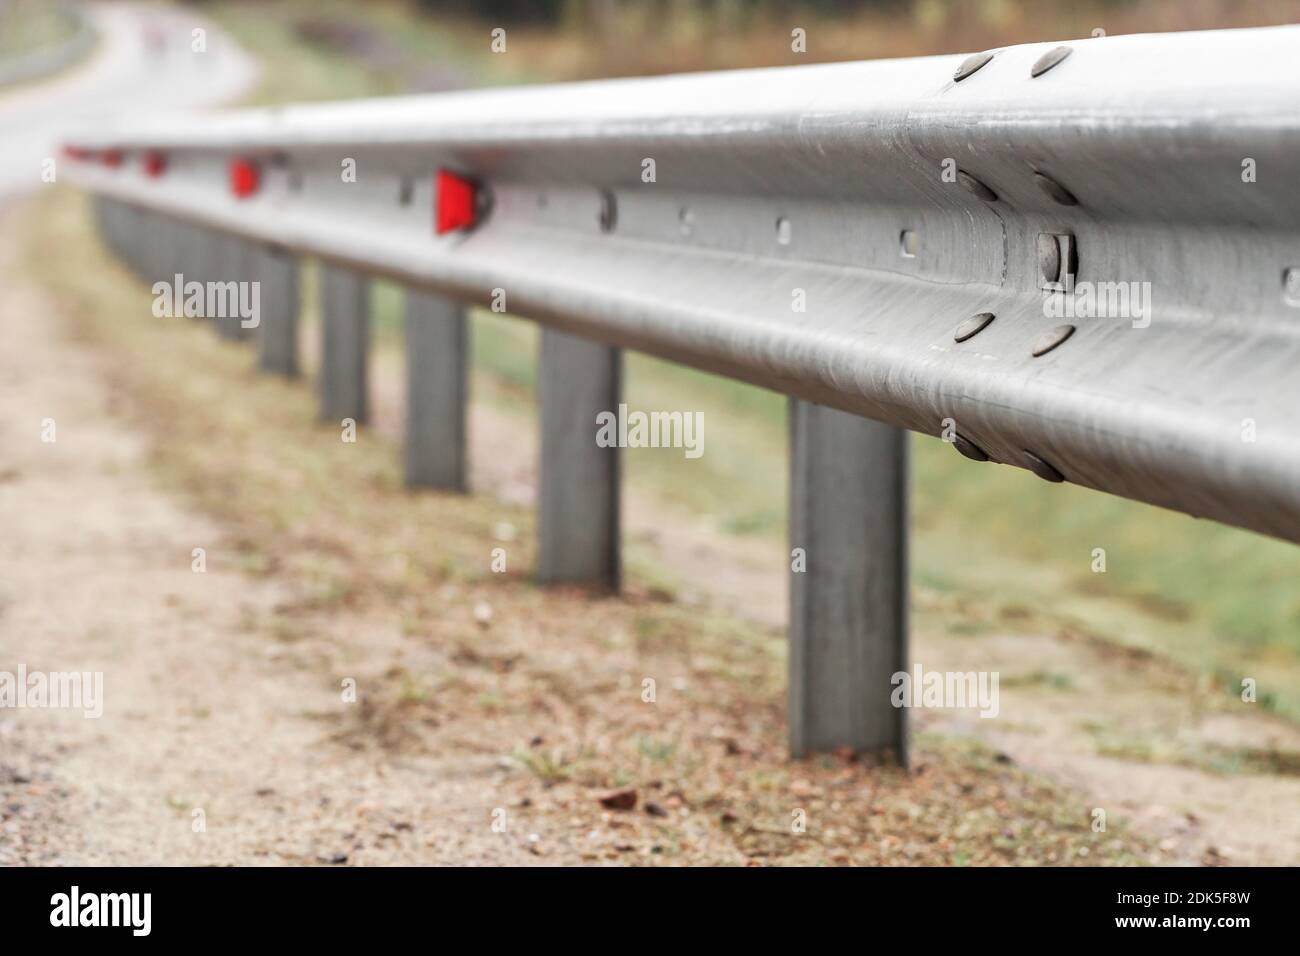 Metal guardrail with retro-reflecting optical units. Highway safety equipment, close-up photo with selective focus Stock Photo